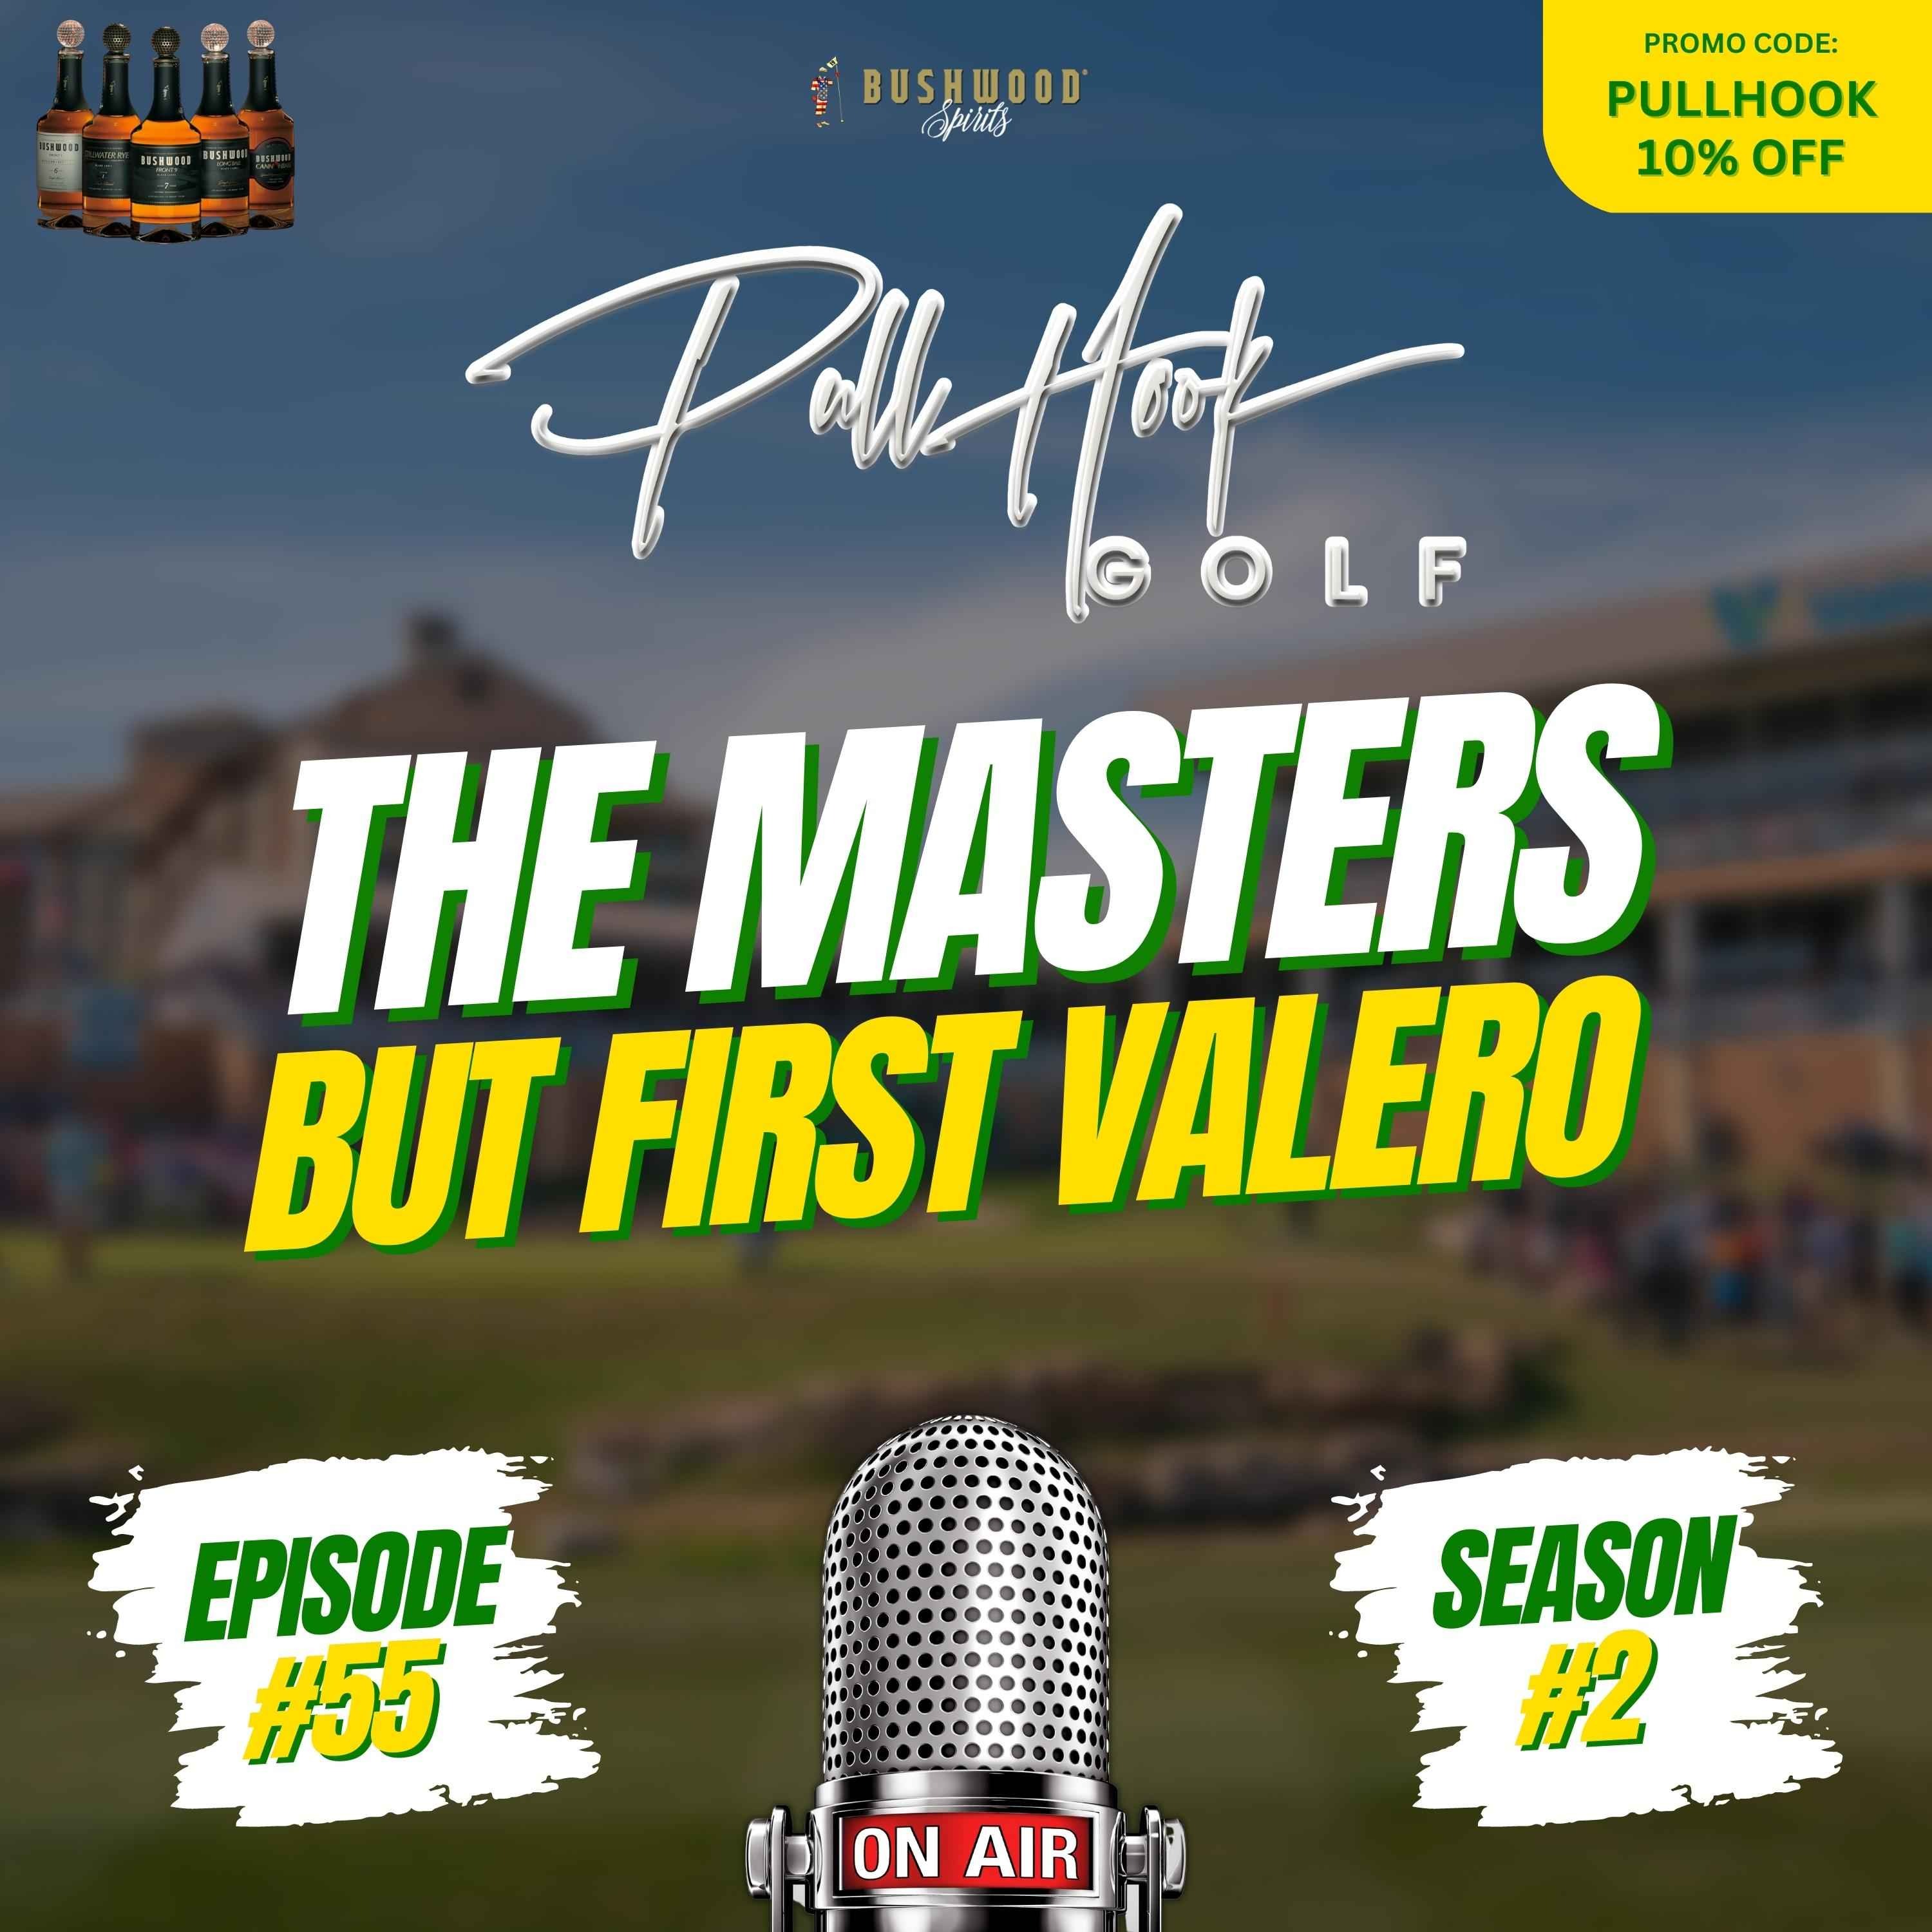 The Masters, But First Valero